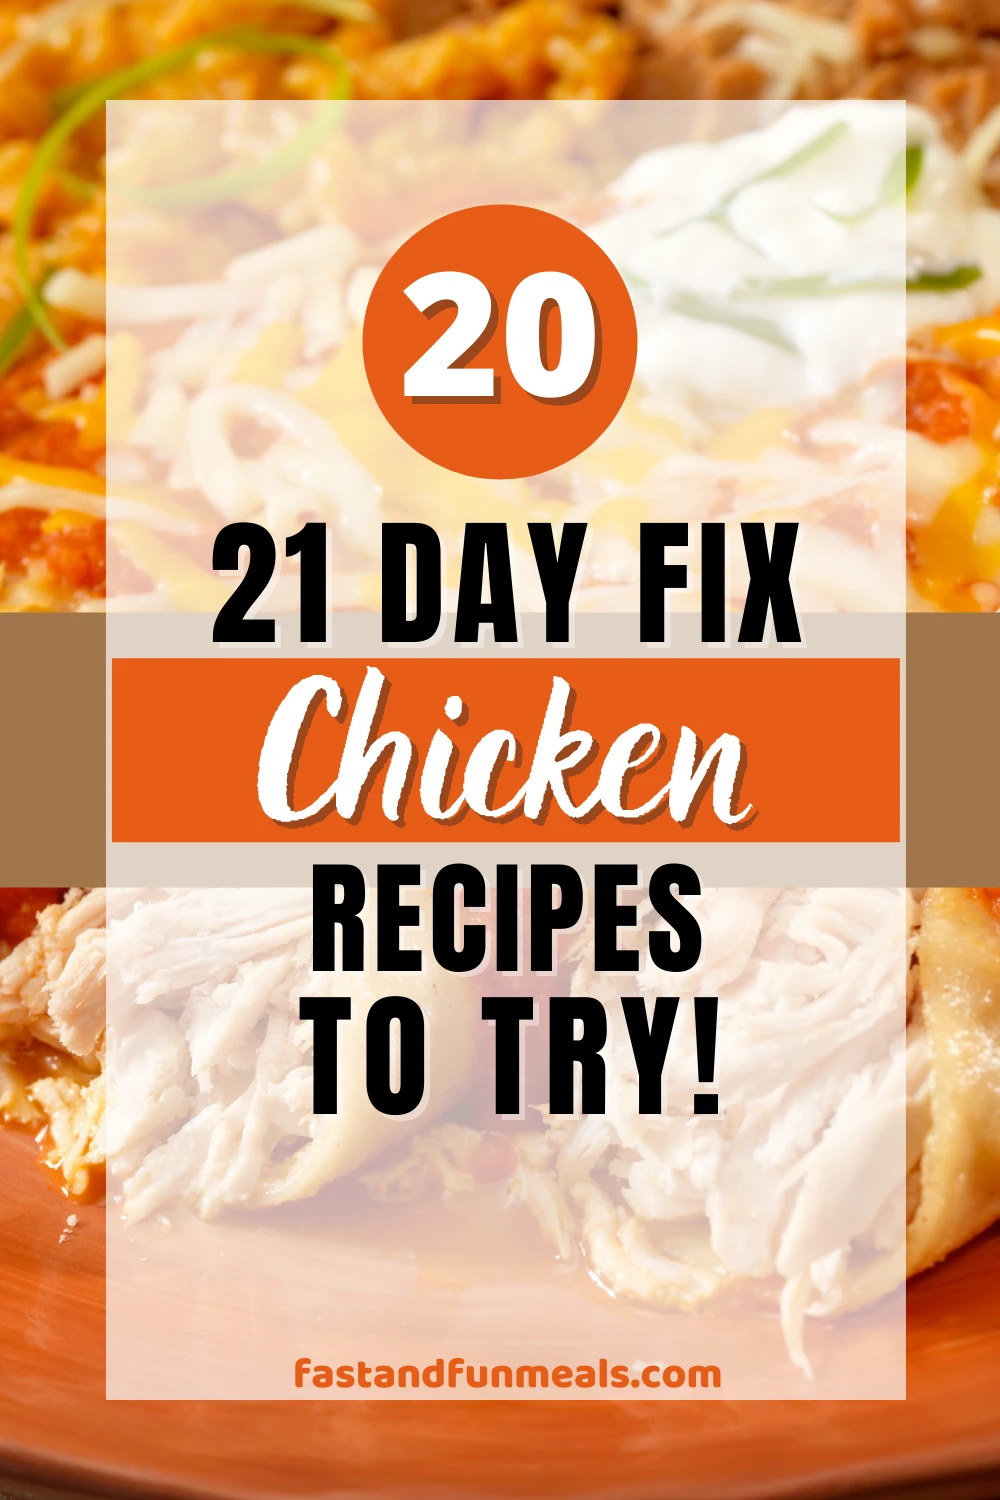 https://fastandfunmeals.com/wp-content/uploads/2022/03/20-21-Day-Fix-Chicken-Recipes-to-Try-Pin.png.webp